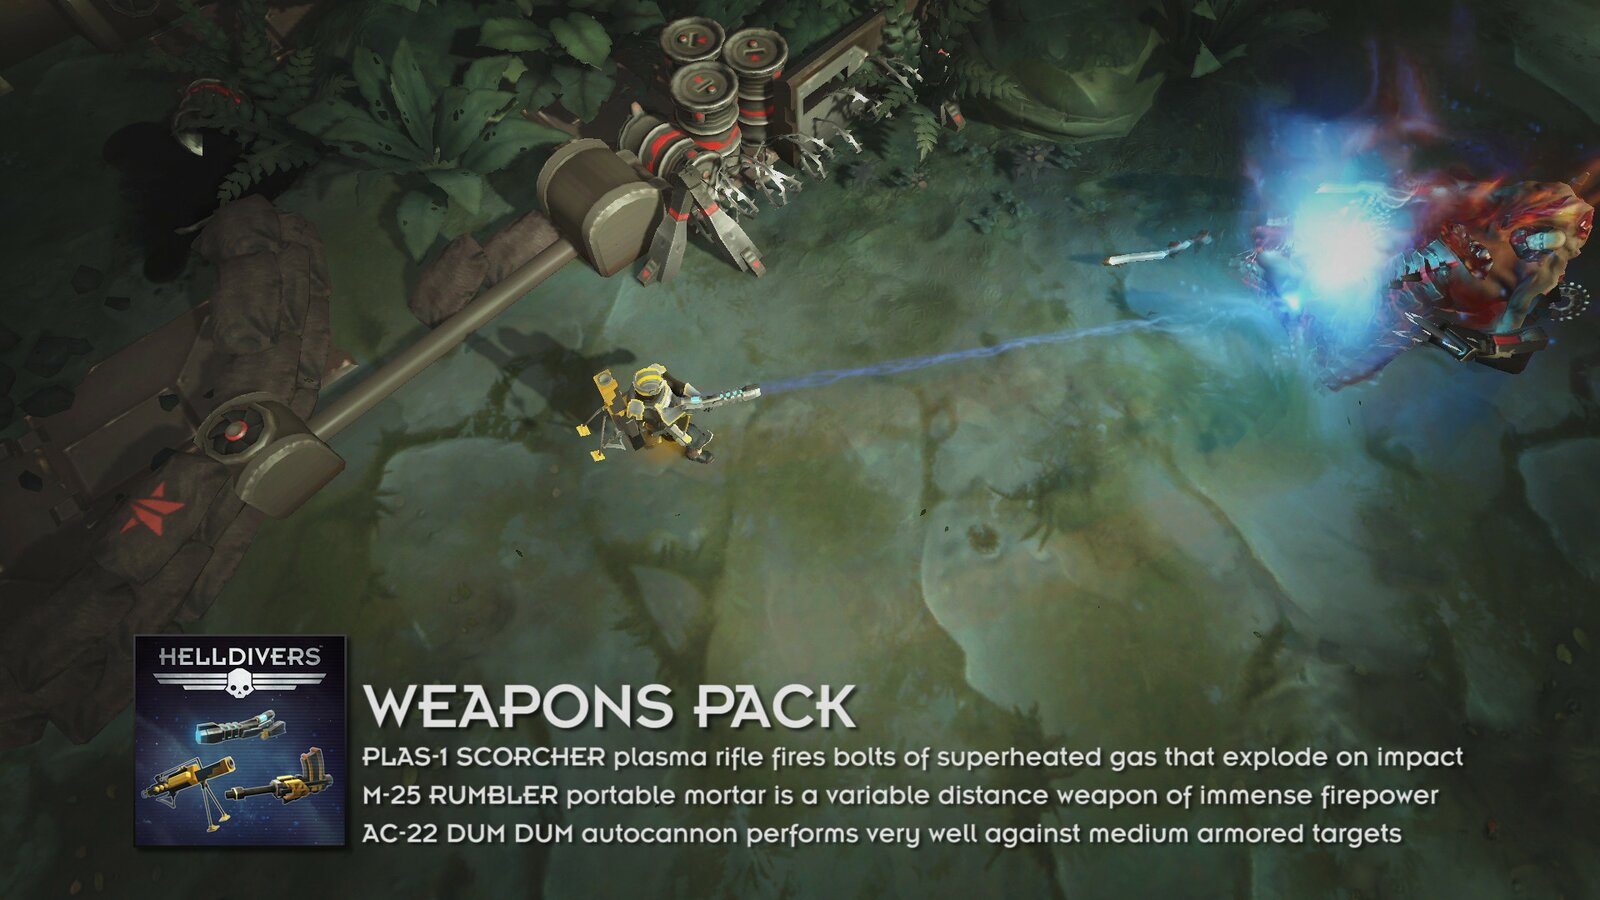 HELLDIVERS - Weapons Pack